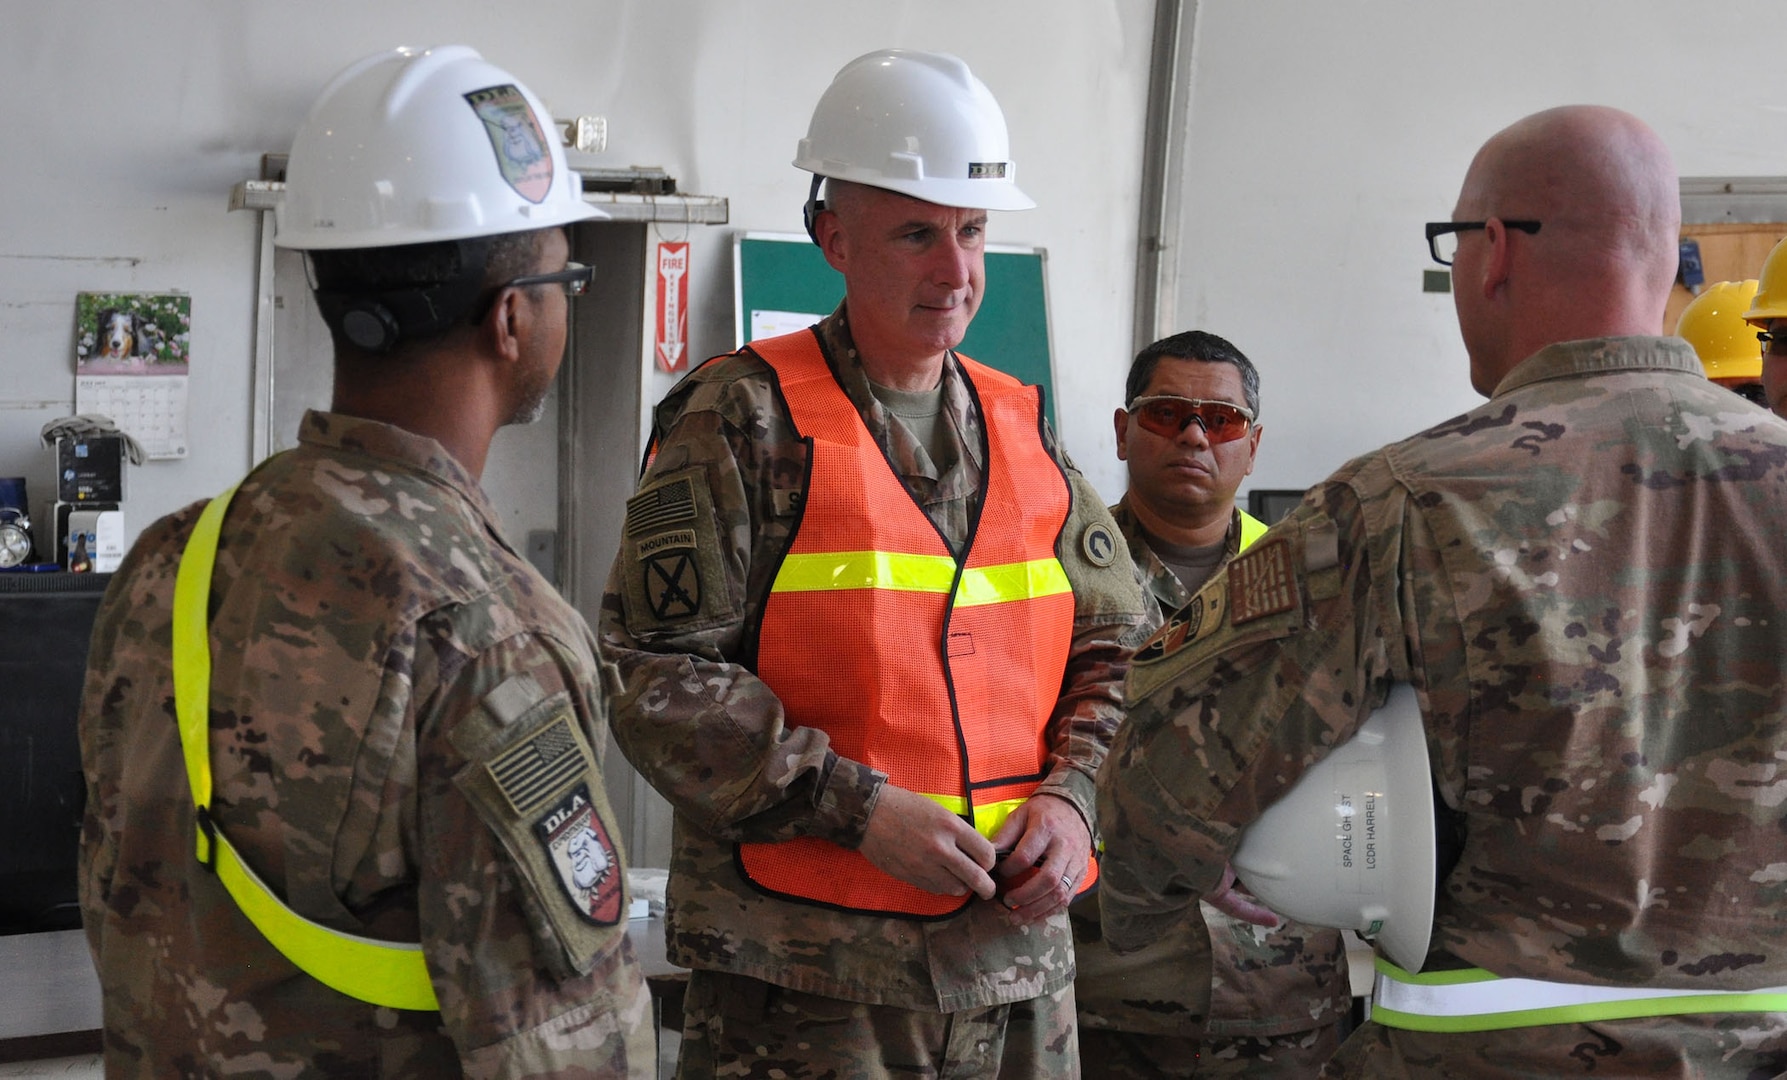 Army Maj. Gen. John Sullivan (center) listens as Navy Lt. Cmdr. Steve Harrell, officer in in charge of DLA Disposition Services-Afghanistan; briefs him before the tour in the receiving area of the Bagram DLA Disposition Services site.  Also shown are Jose Montanez (far left), Bagram site chief; and Navy Chief Petty Officer Michell Valencia (far right), Bagram deputy site chief.